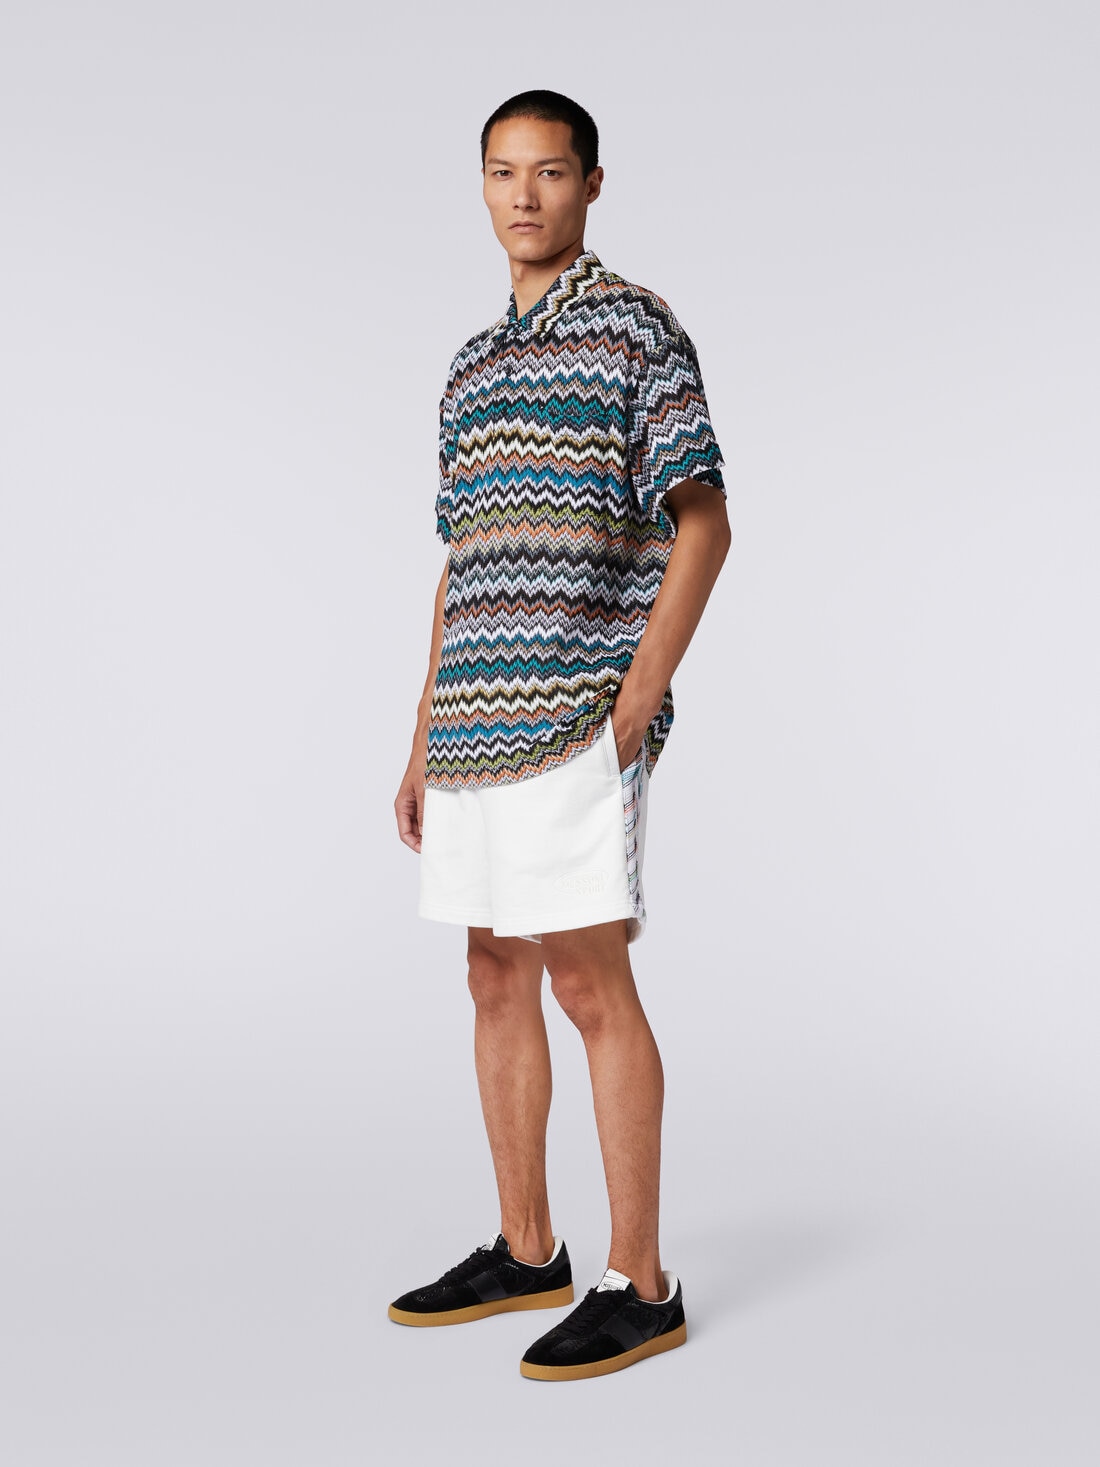 Polo shirt in zigzag cotton and viscose knit, Multicoloured  - TS24S201BR00UUSM9AX - 2